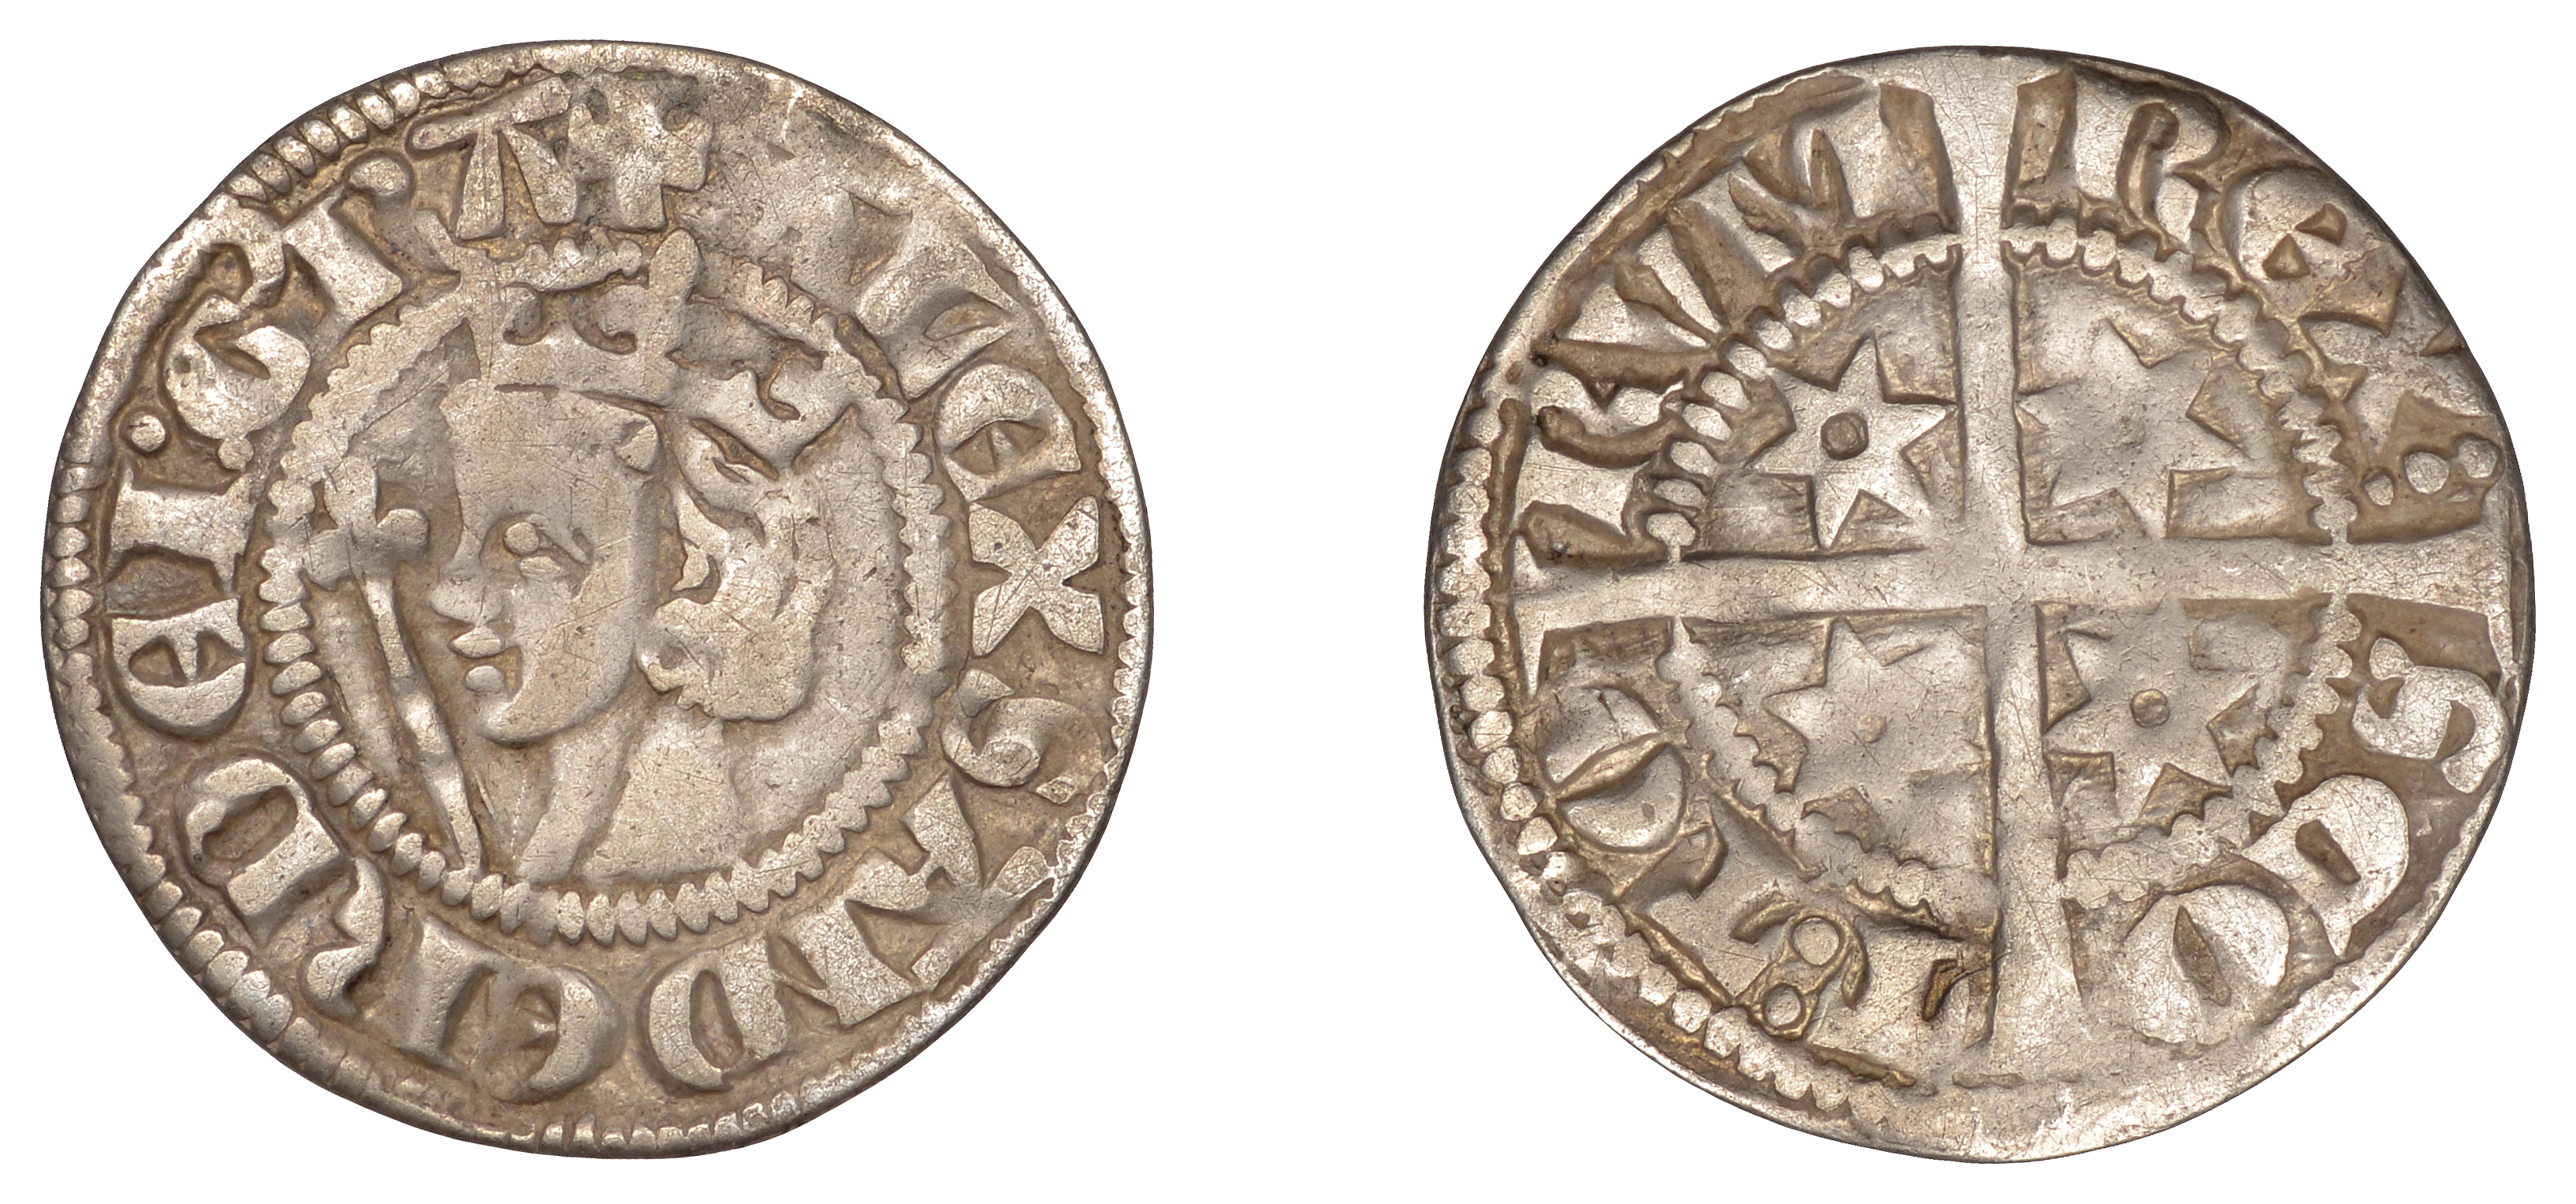 Alexander III (1249-1286), Second coinage, Sterling, class A, mm. plain cross on obv. only,...